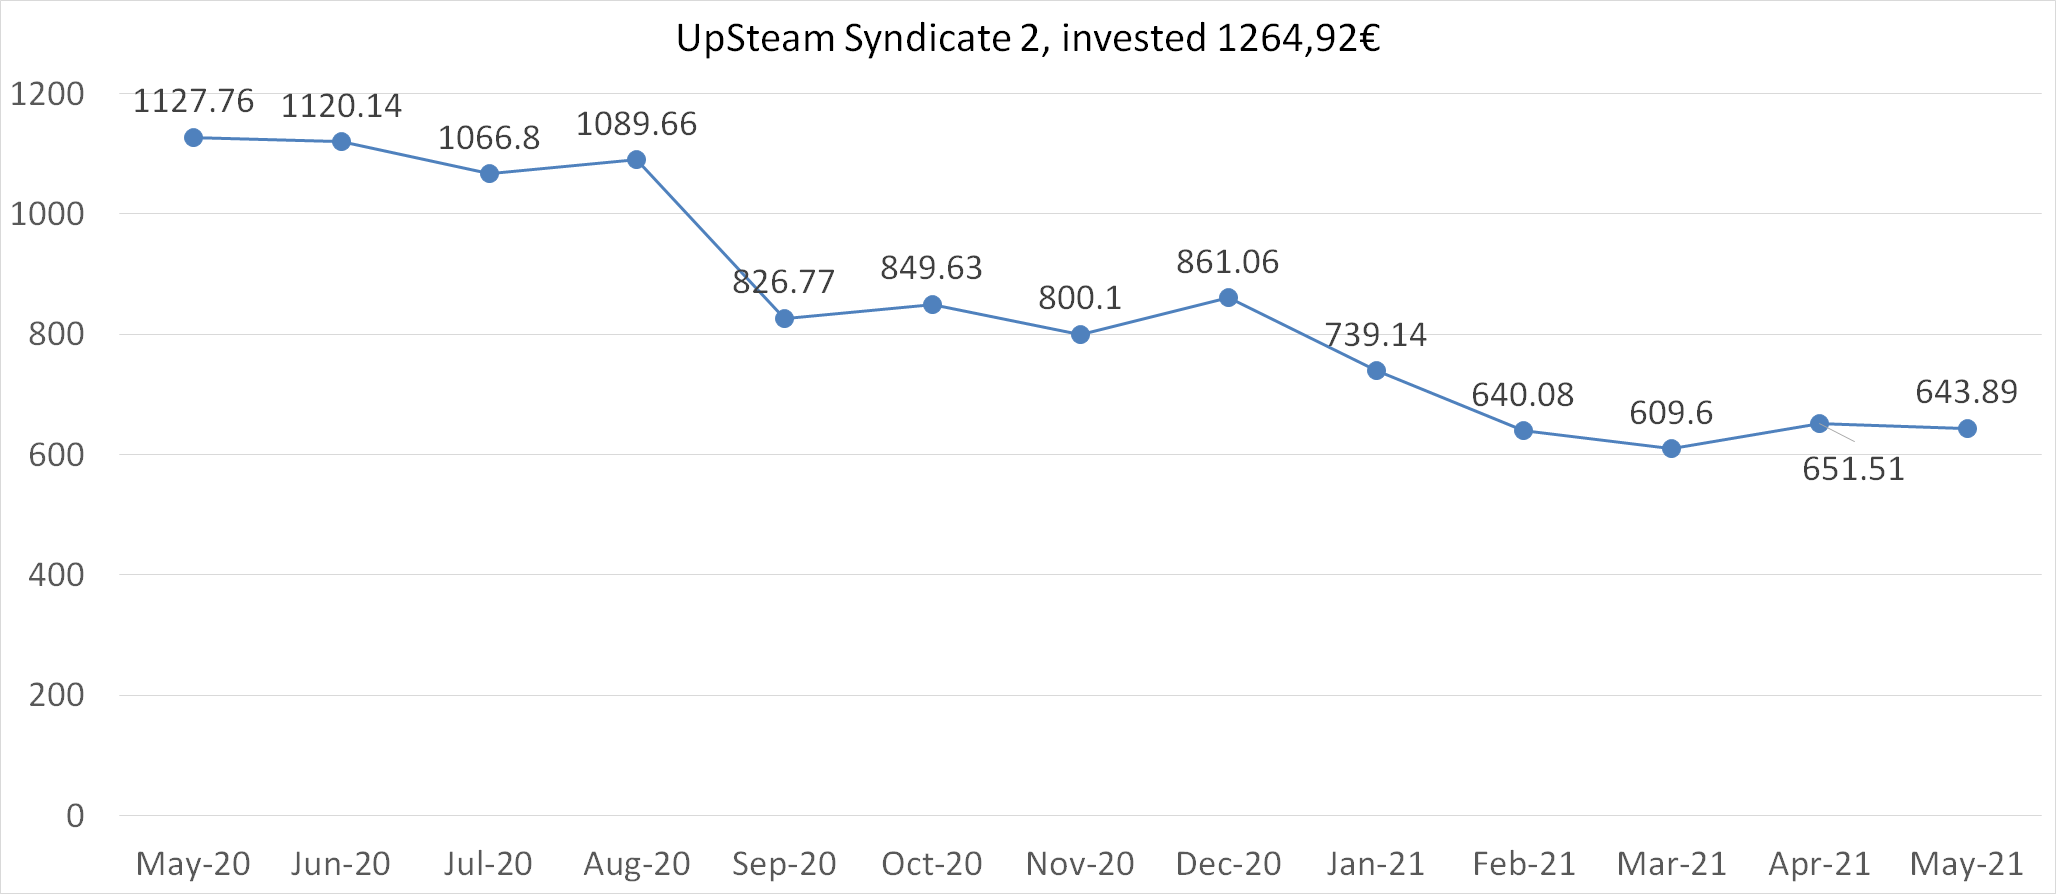 upsteam syndicate 2 worth in may 2021